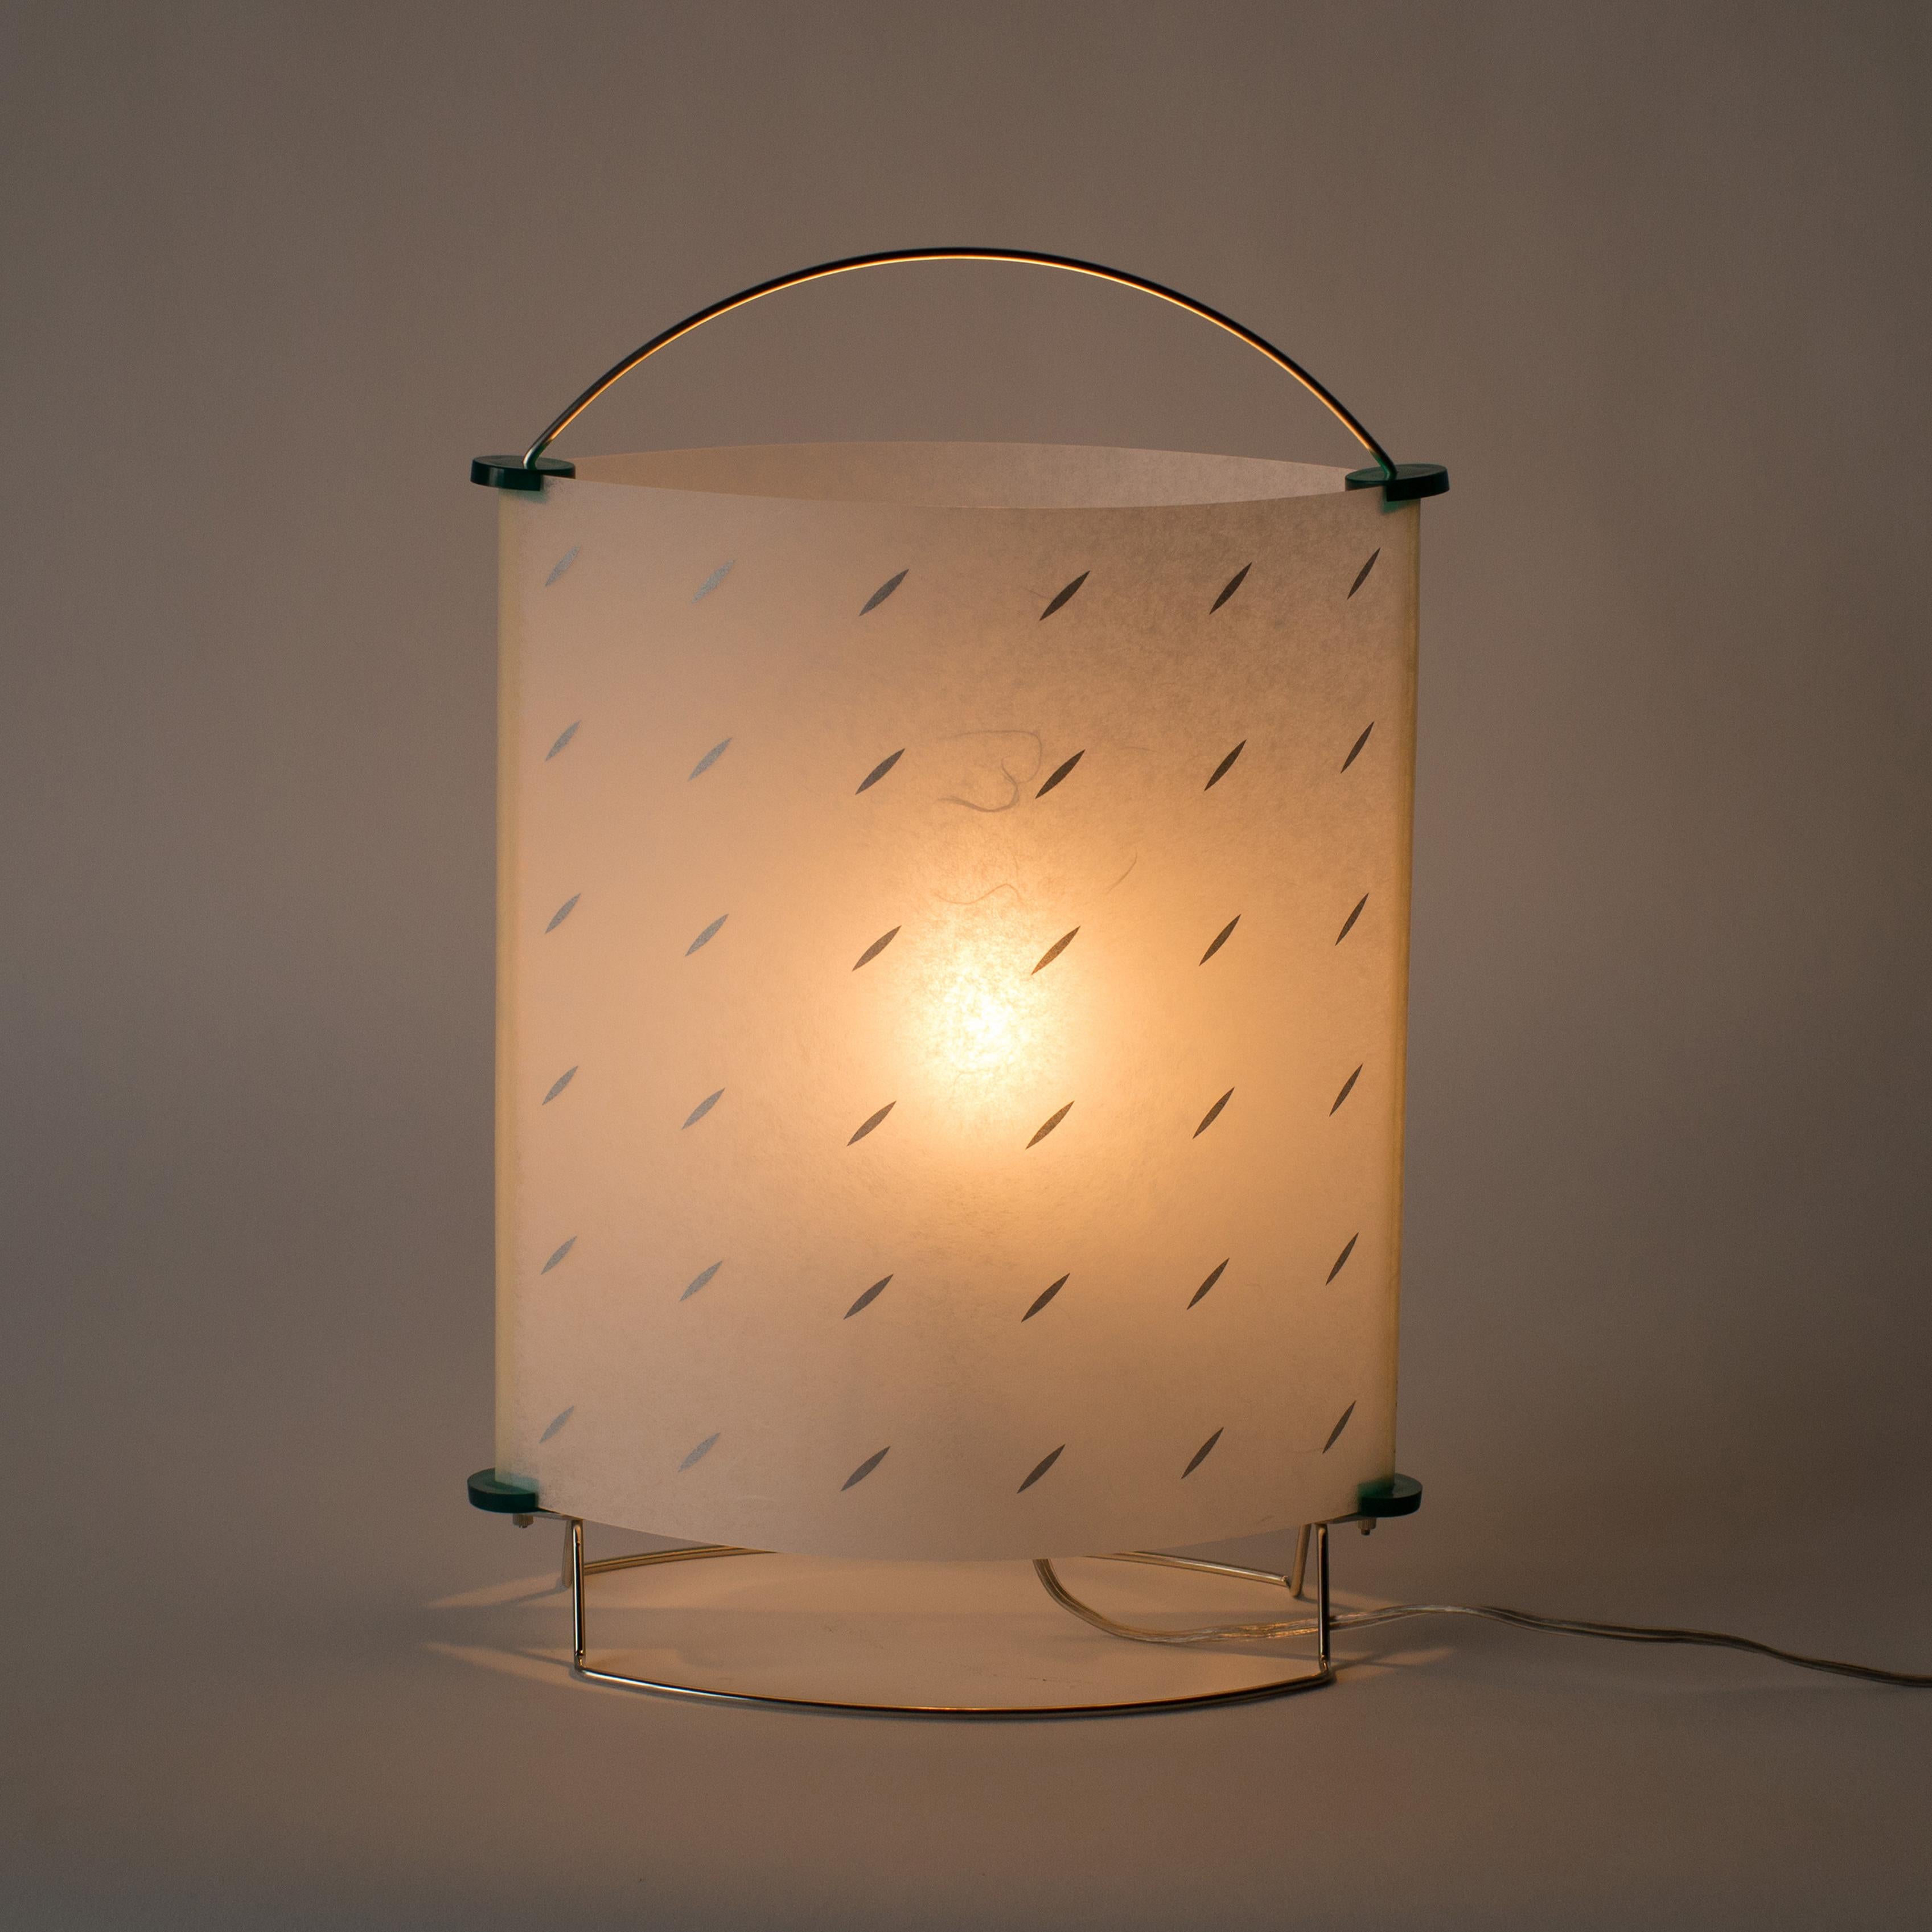 Floor or table lamp deigned by Masanori Umeda.
This lighting consists of stainless frame and plastic covered washi Japanese paper shade. Shade has original washi texture.